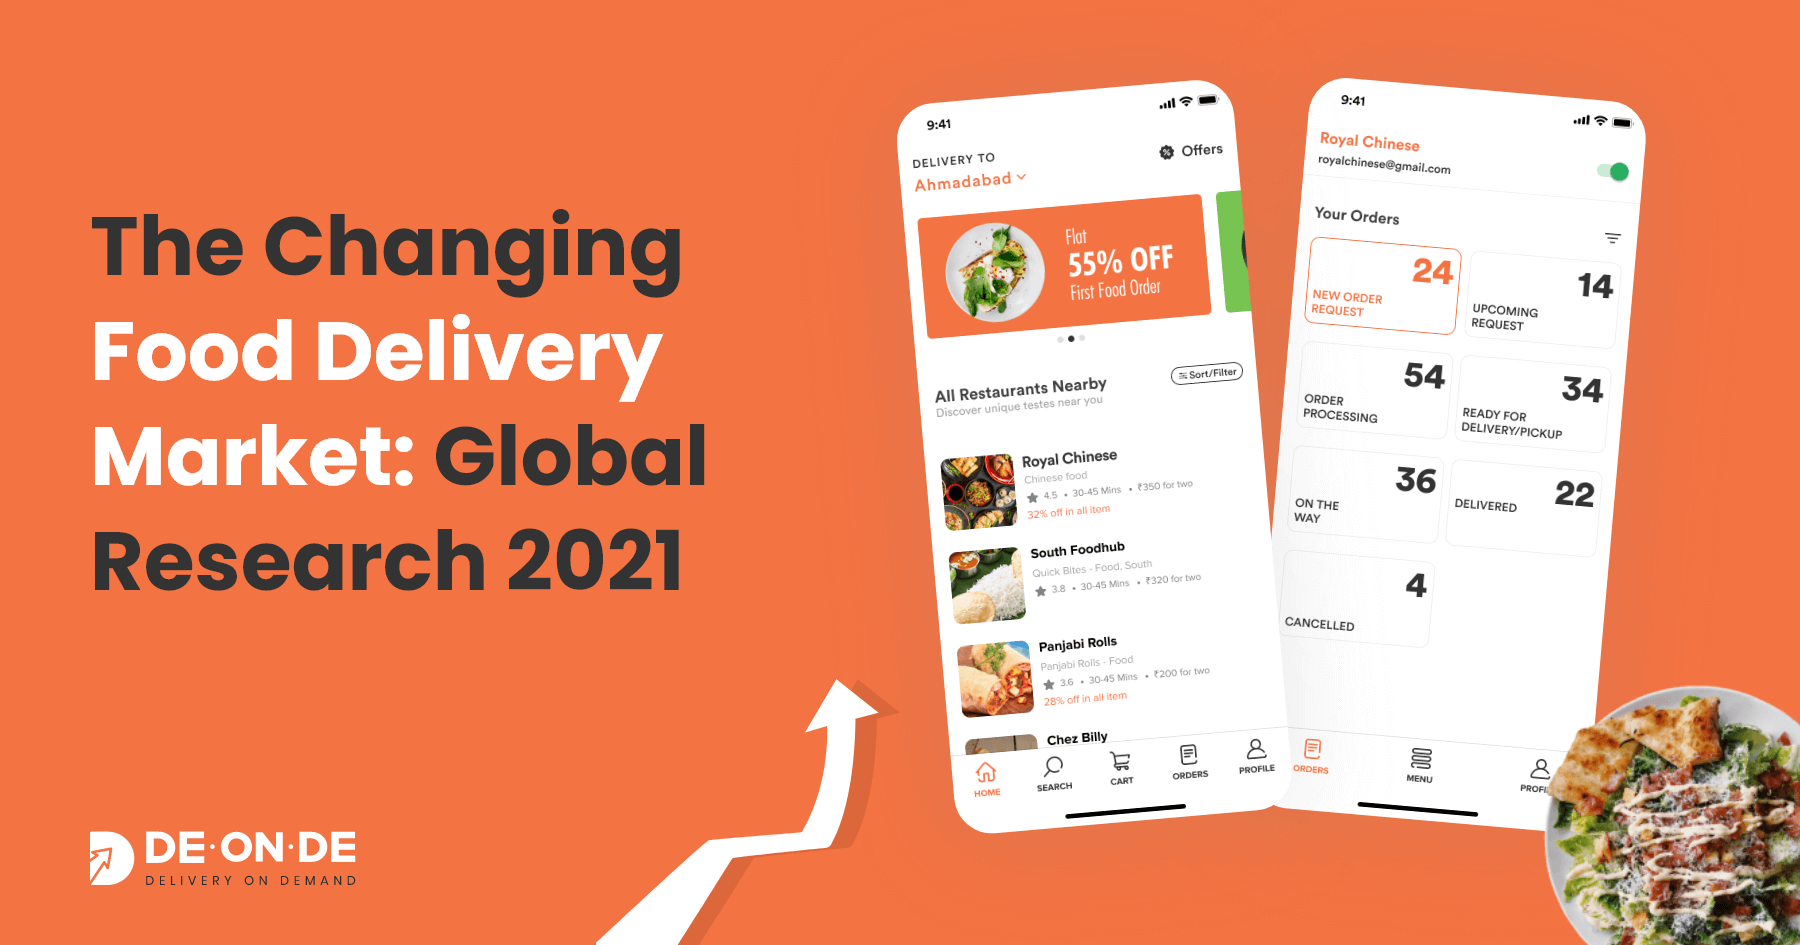 blog-The-Changing-Food-Delivery-Market-Global-Research-20211.png